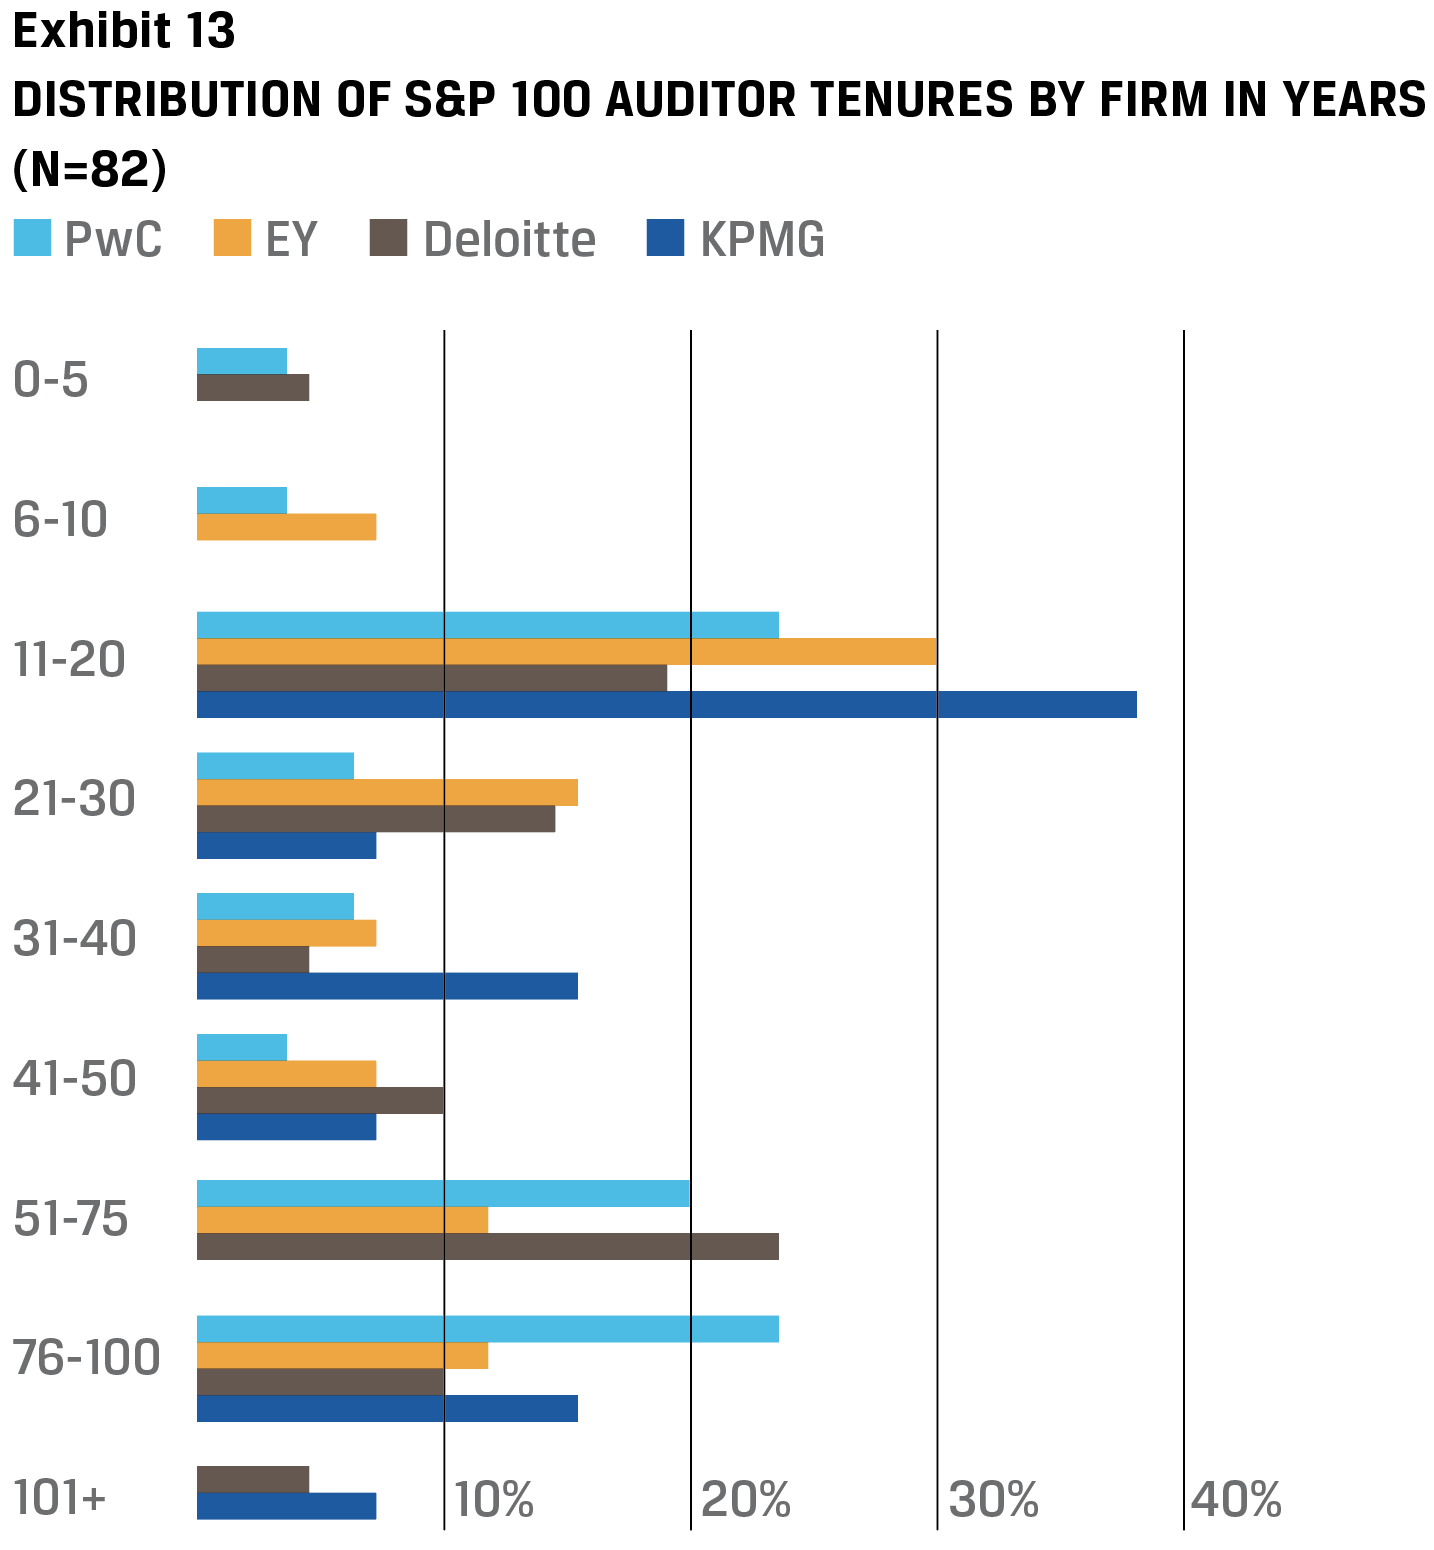 Exhibit 13 Distribution of S&P 100 auditor tenures by firm in years (N=82)